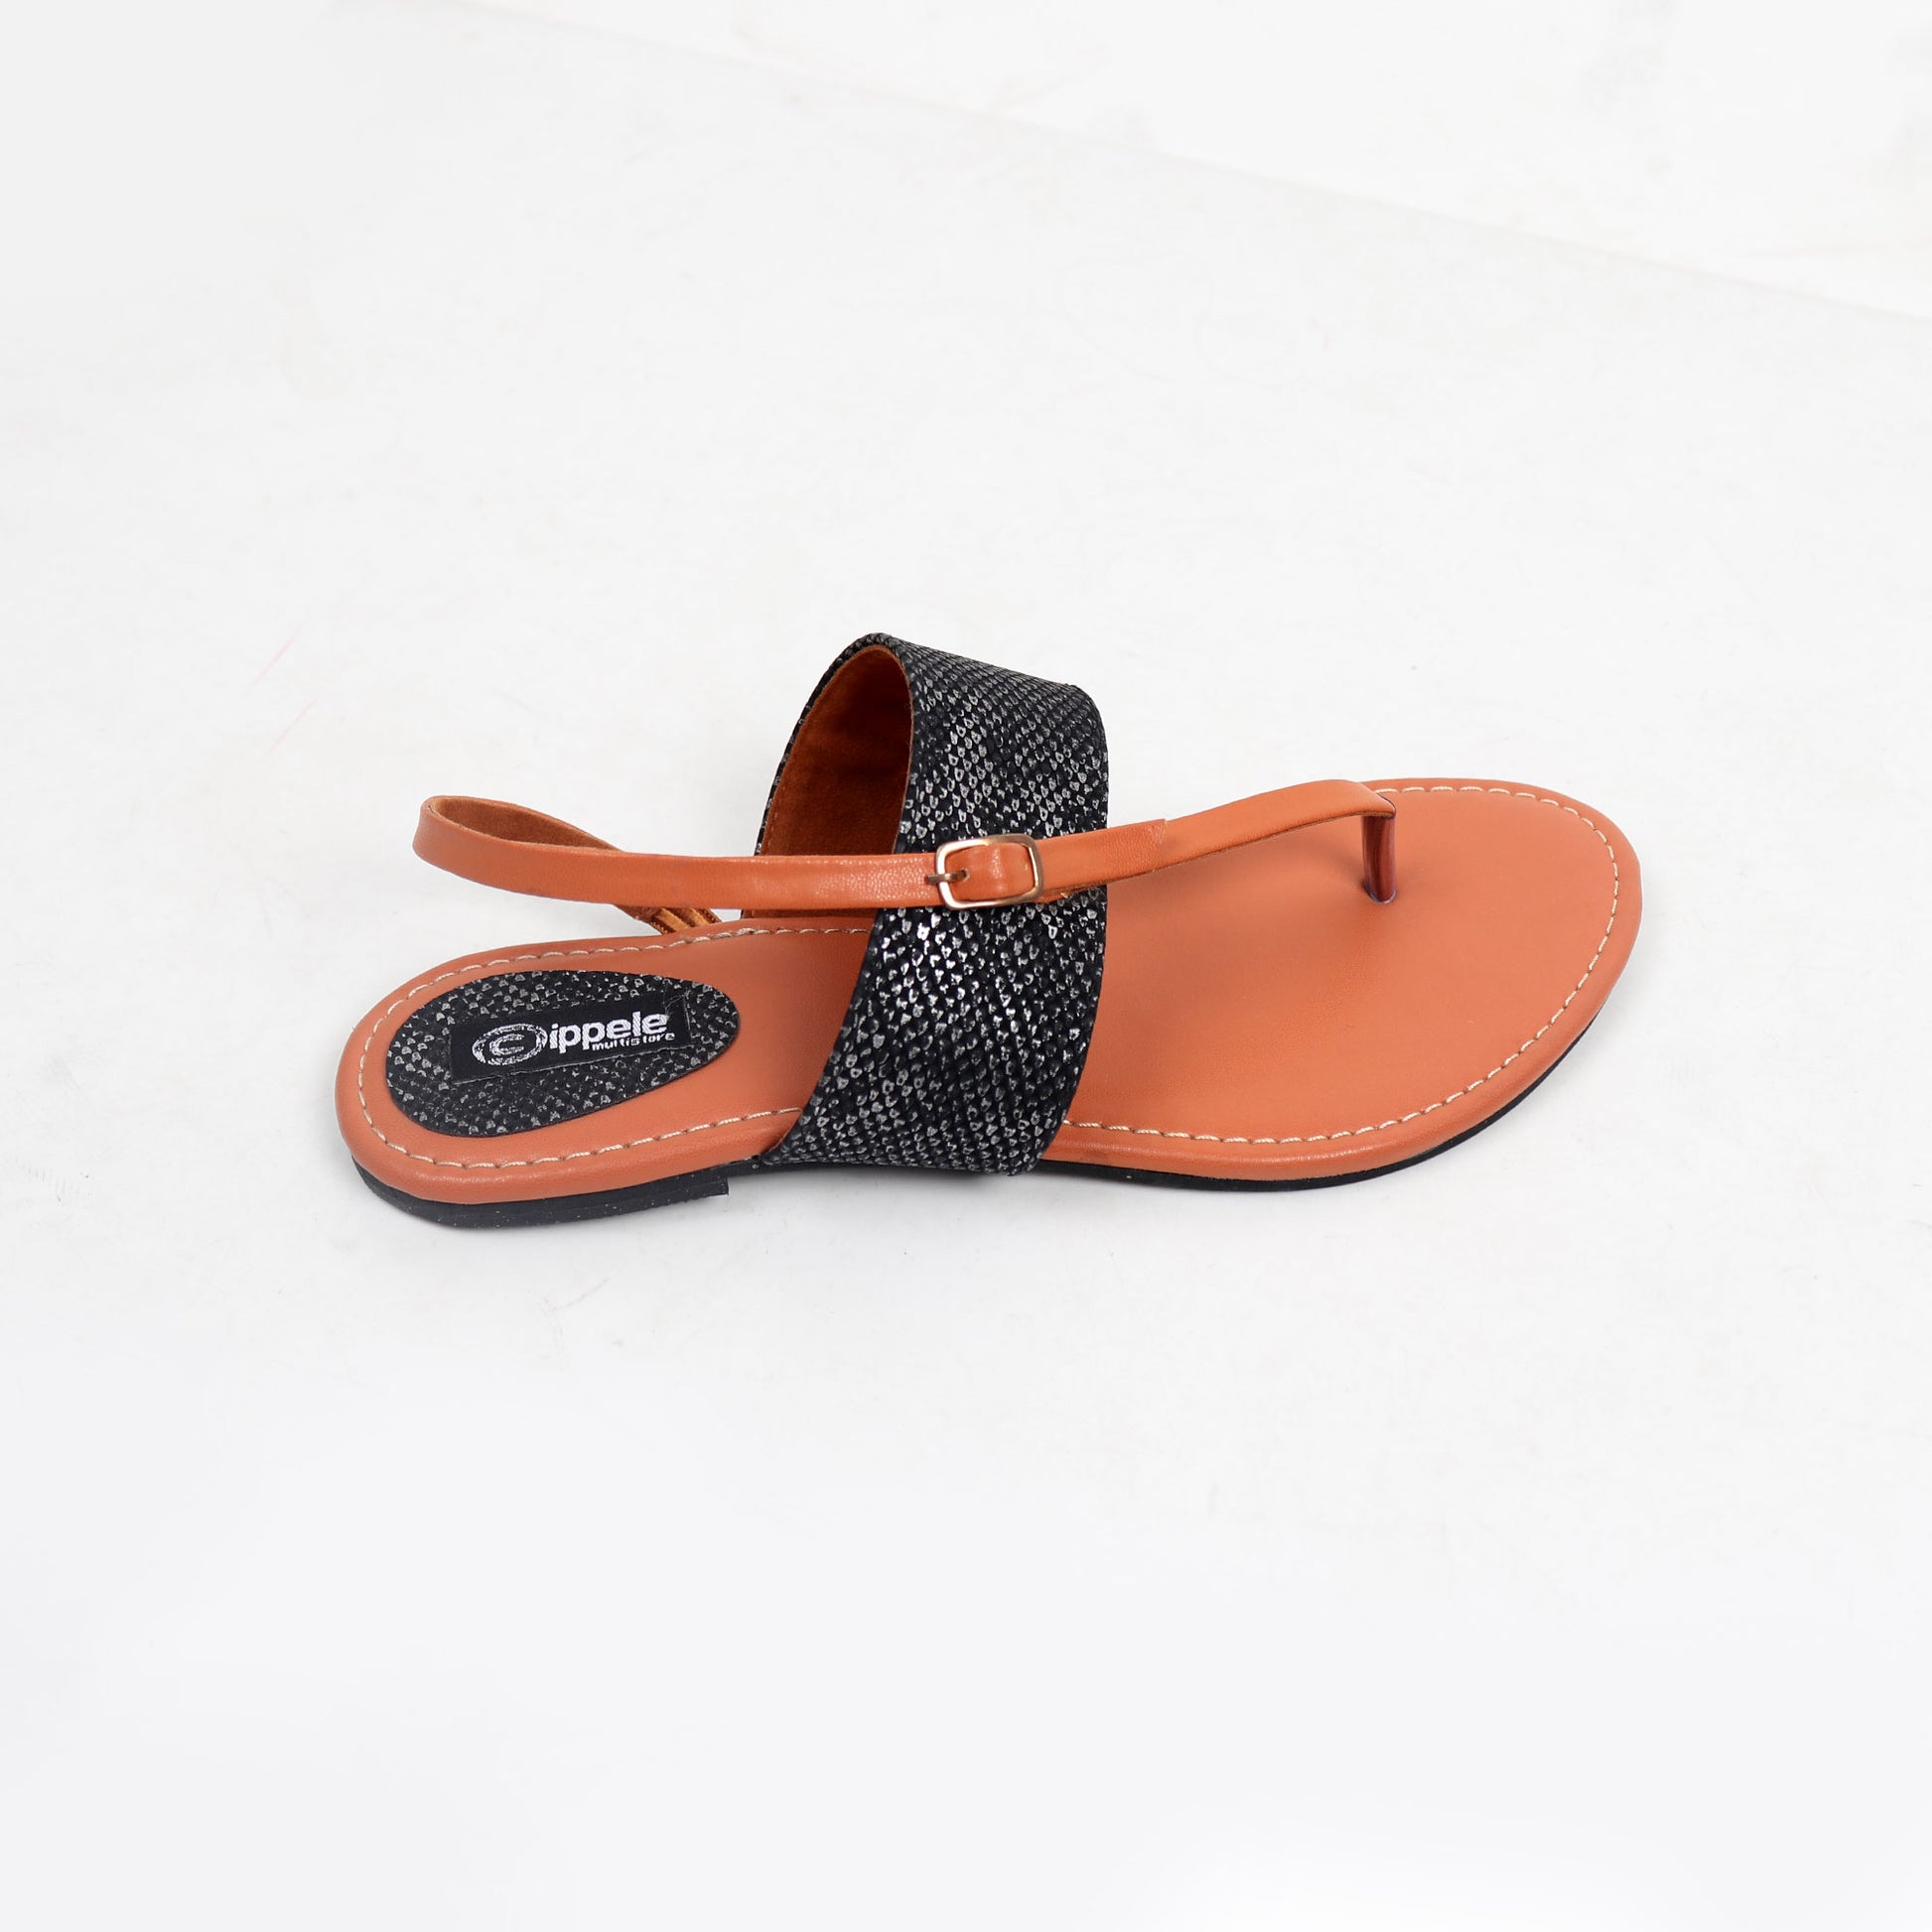 Foot Wear,Something Fashionable Sandals With Black Upper - Cippele Multi Store